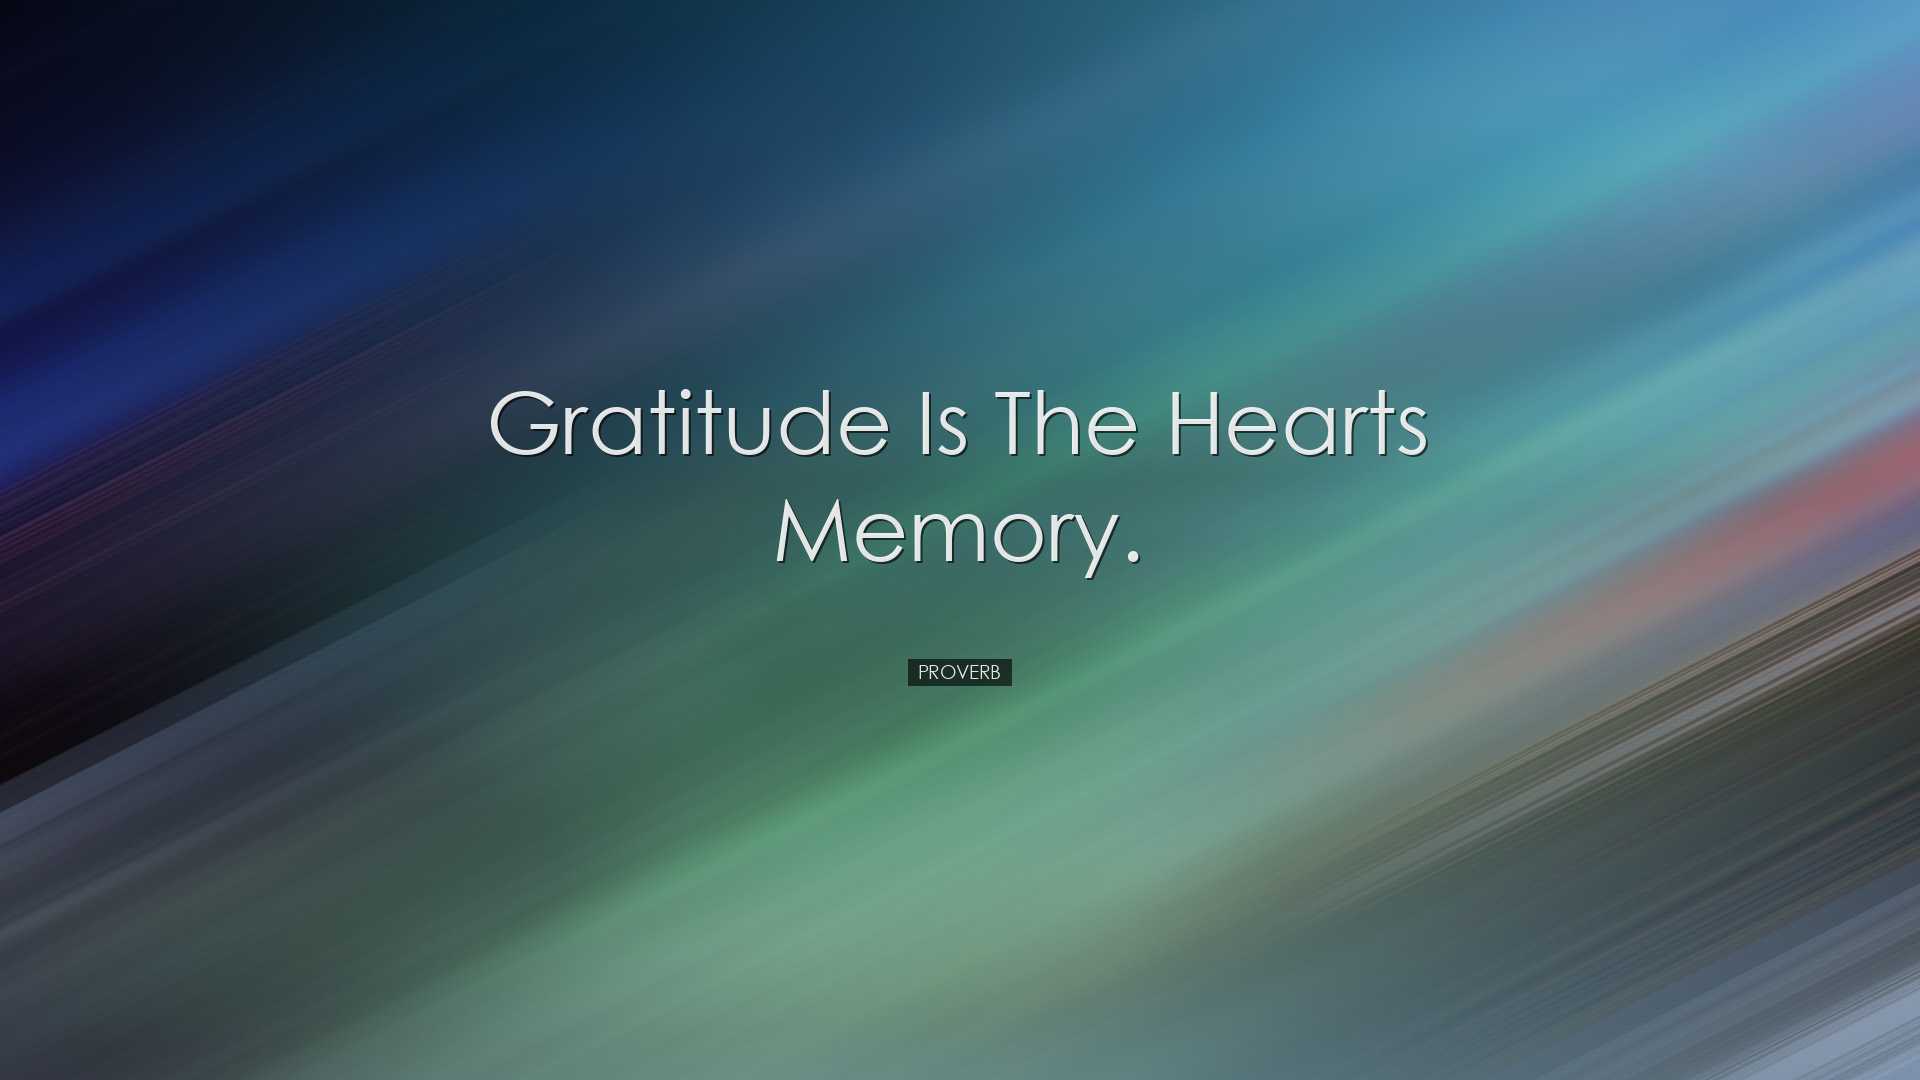 Gratitude is the hearts memory. - Proverb